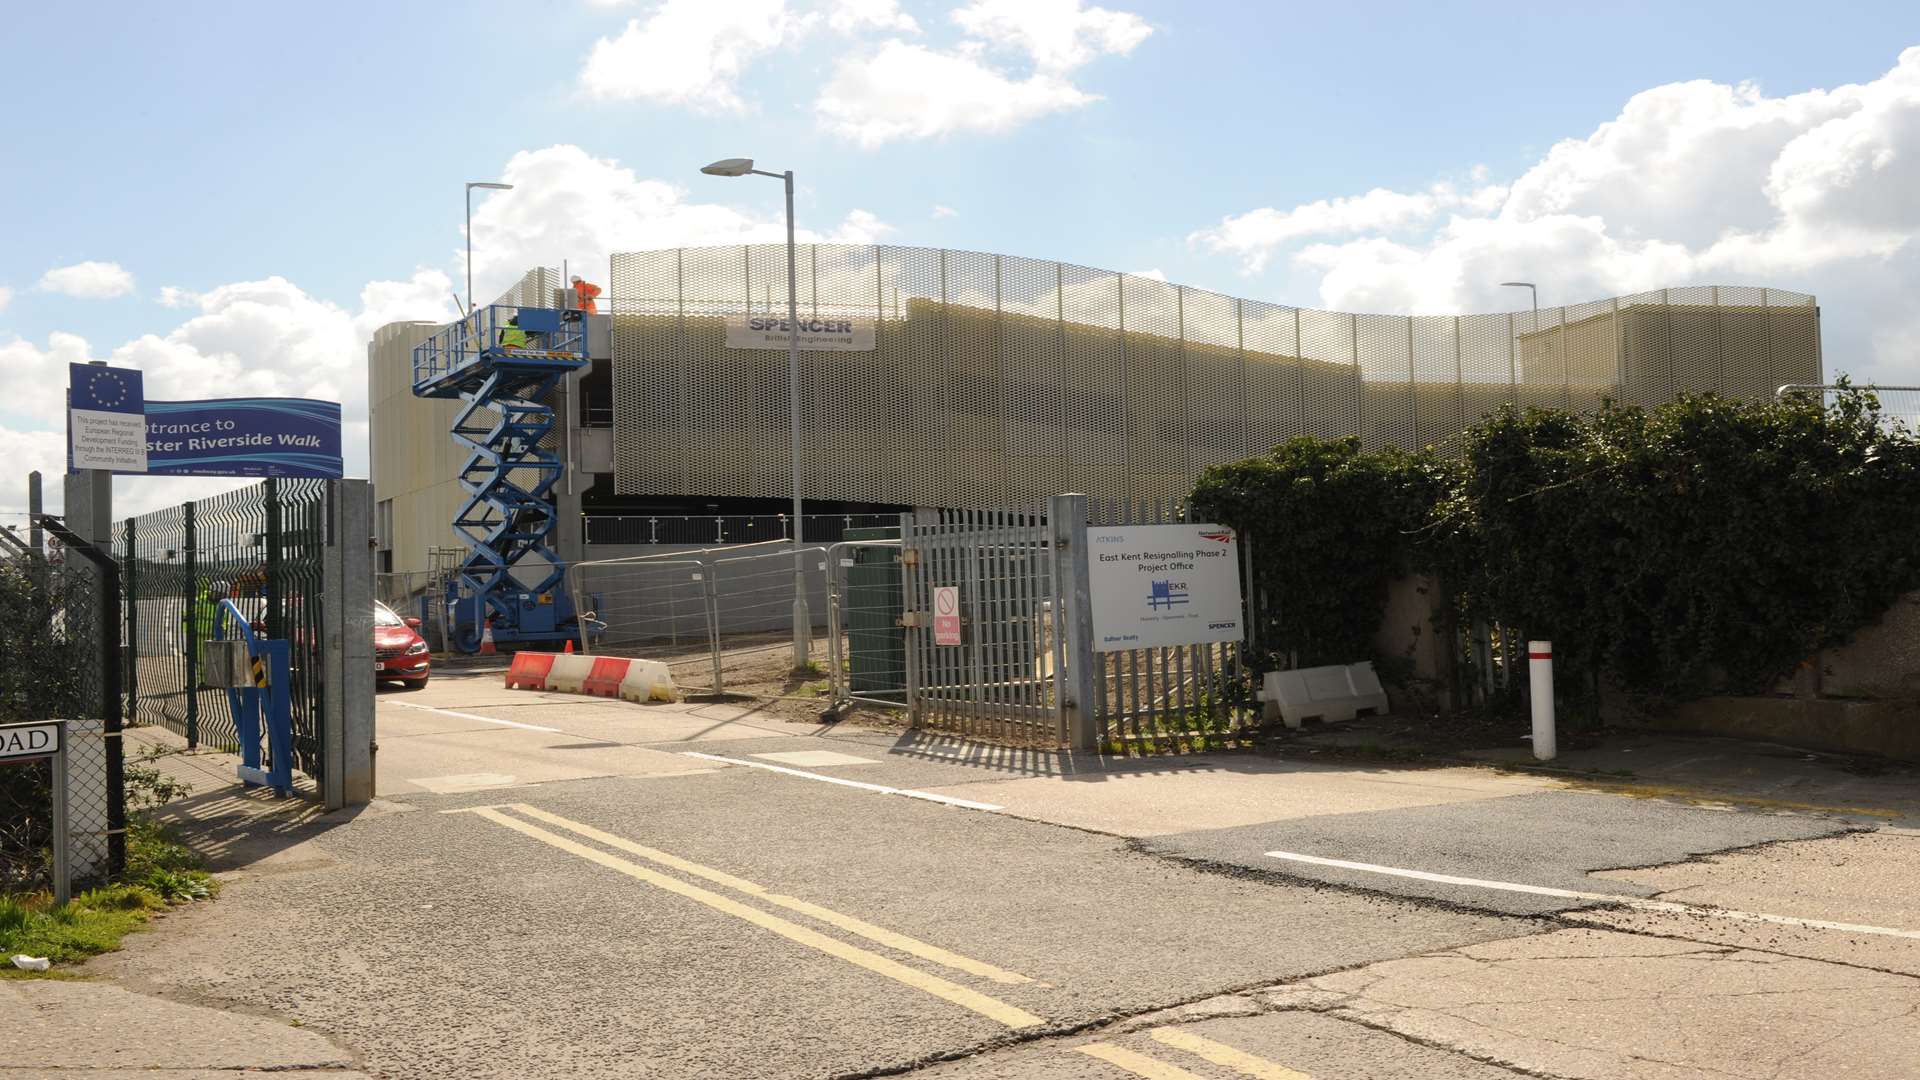 The new multi-storey car park in Cory's Road, Rochester